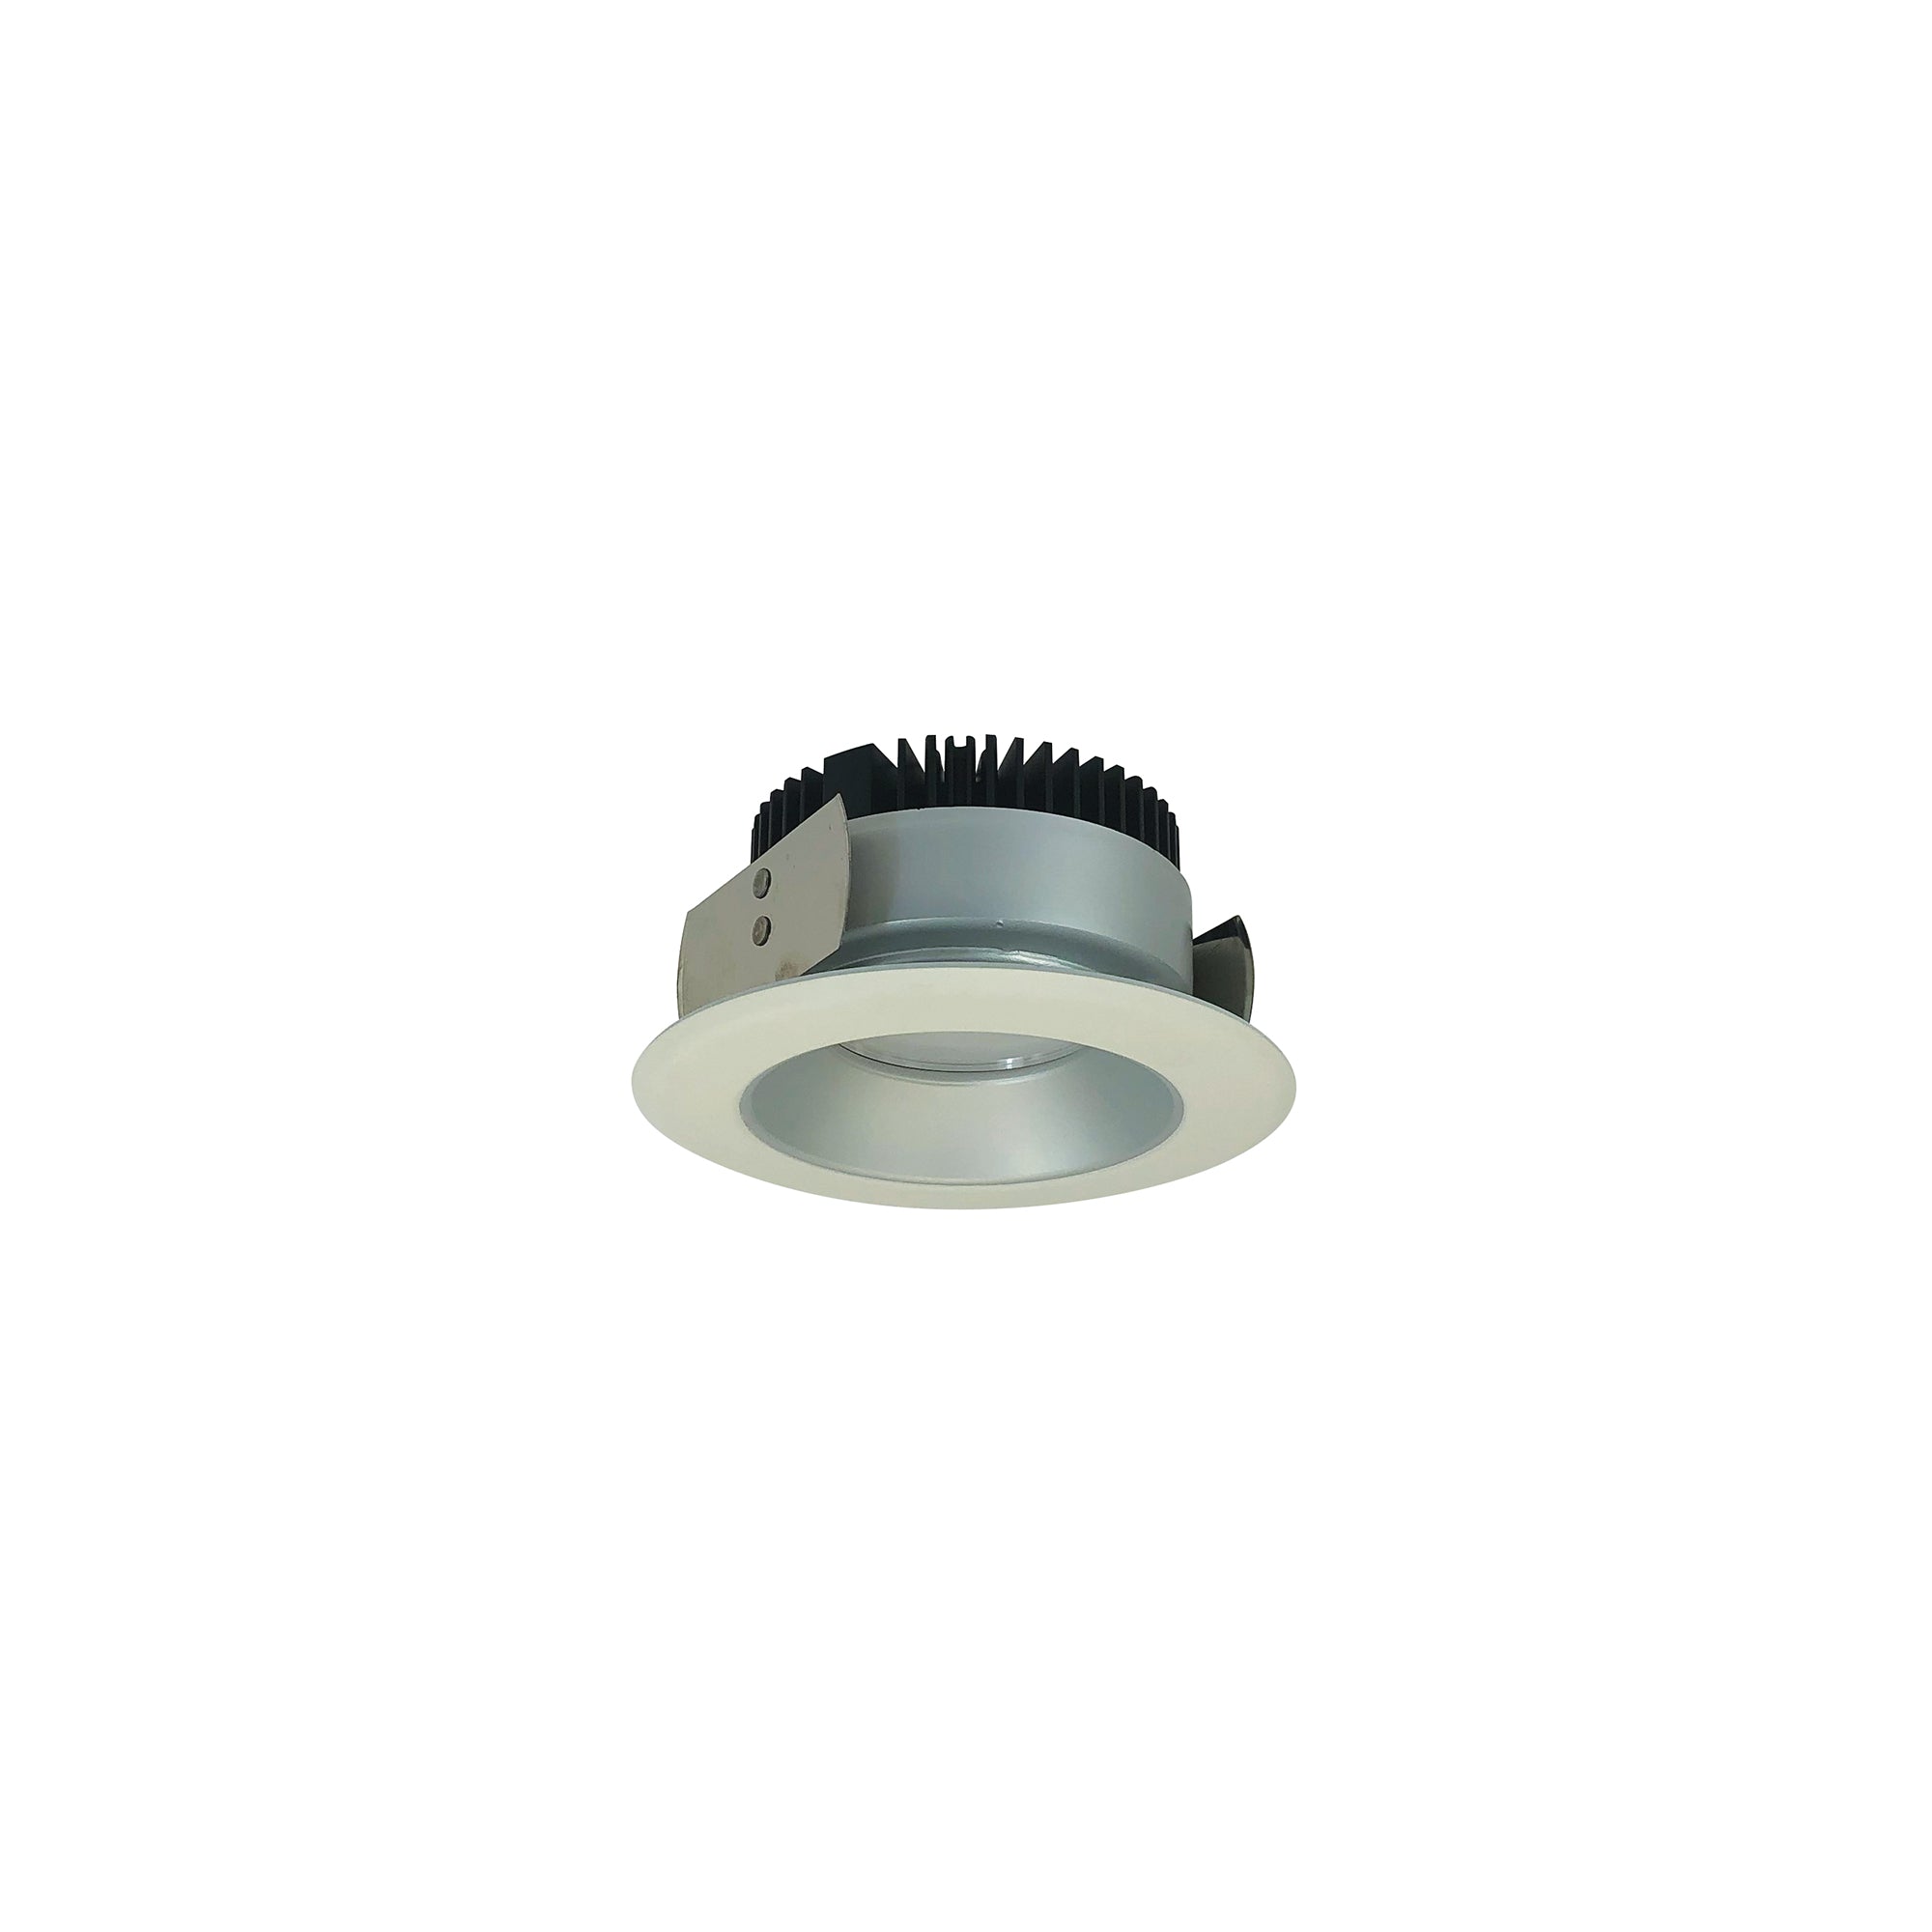 Nora Lighting NRM2-411L0927SHZW - Recessed - 4 Inch Marquise II Round Reflector, 900lm, 2700K, Spot, Haze/White